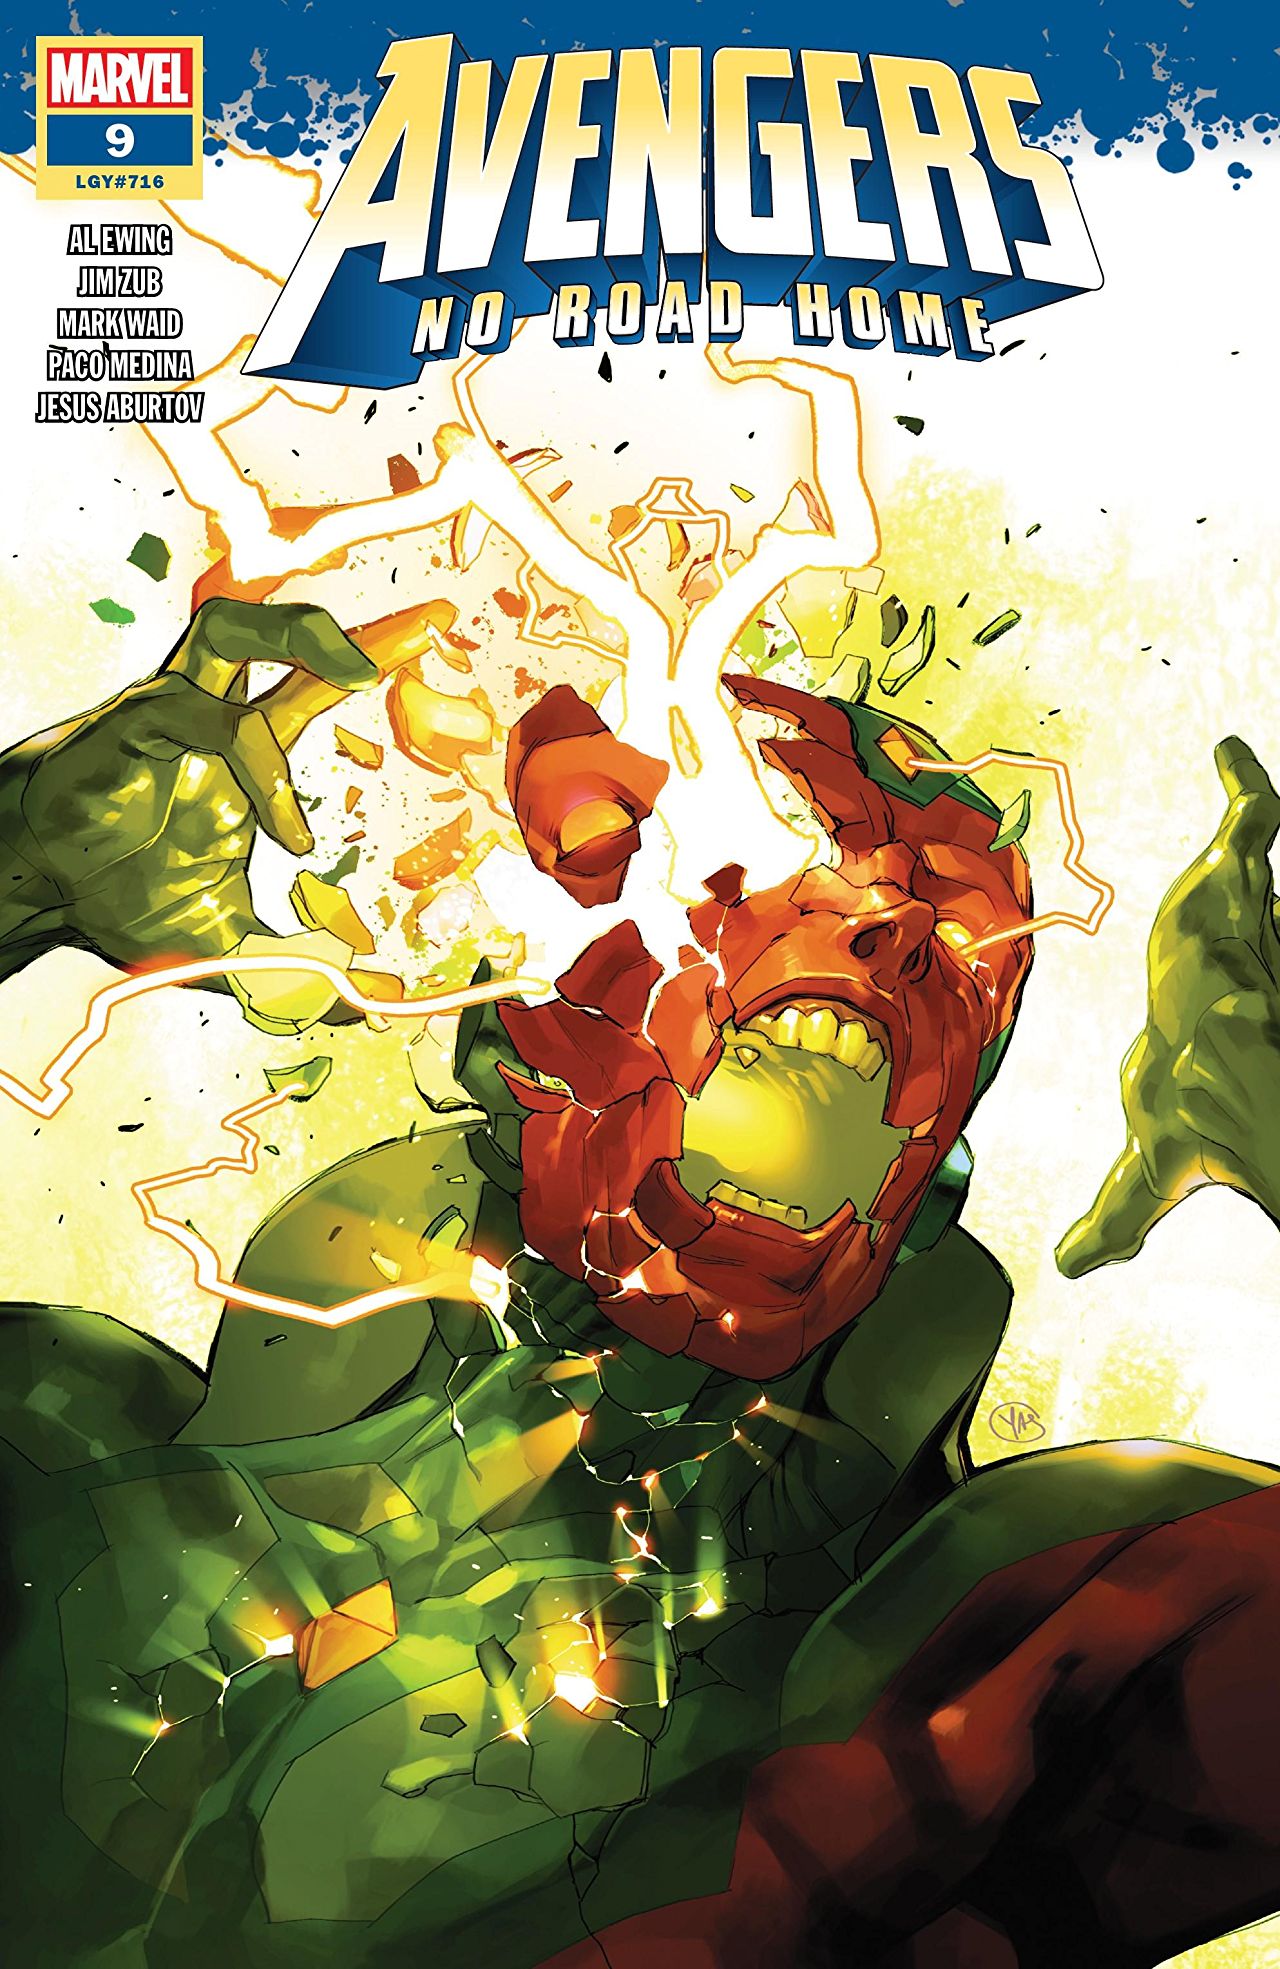 Marvel Preview: Avengers: No Road Home #9